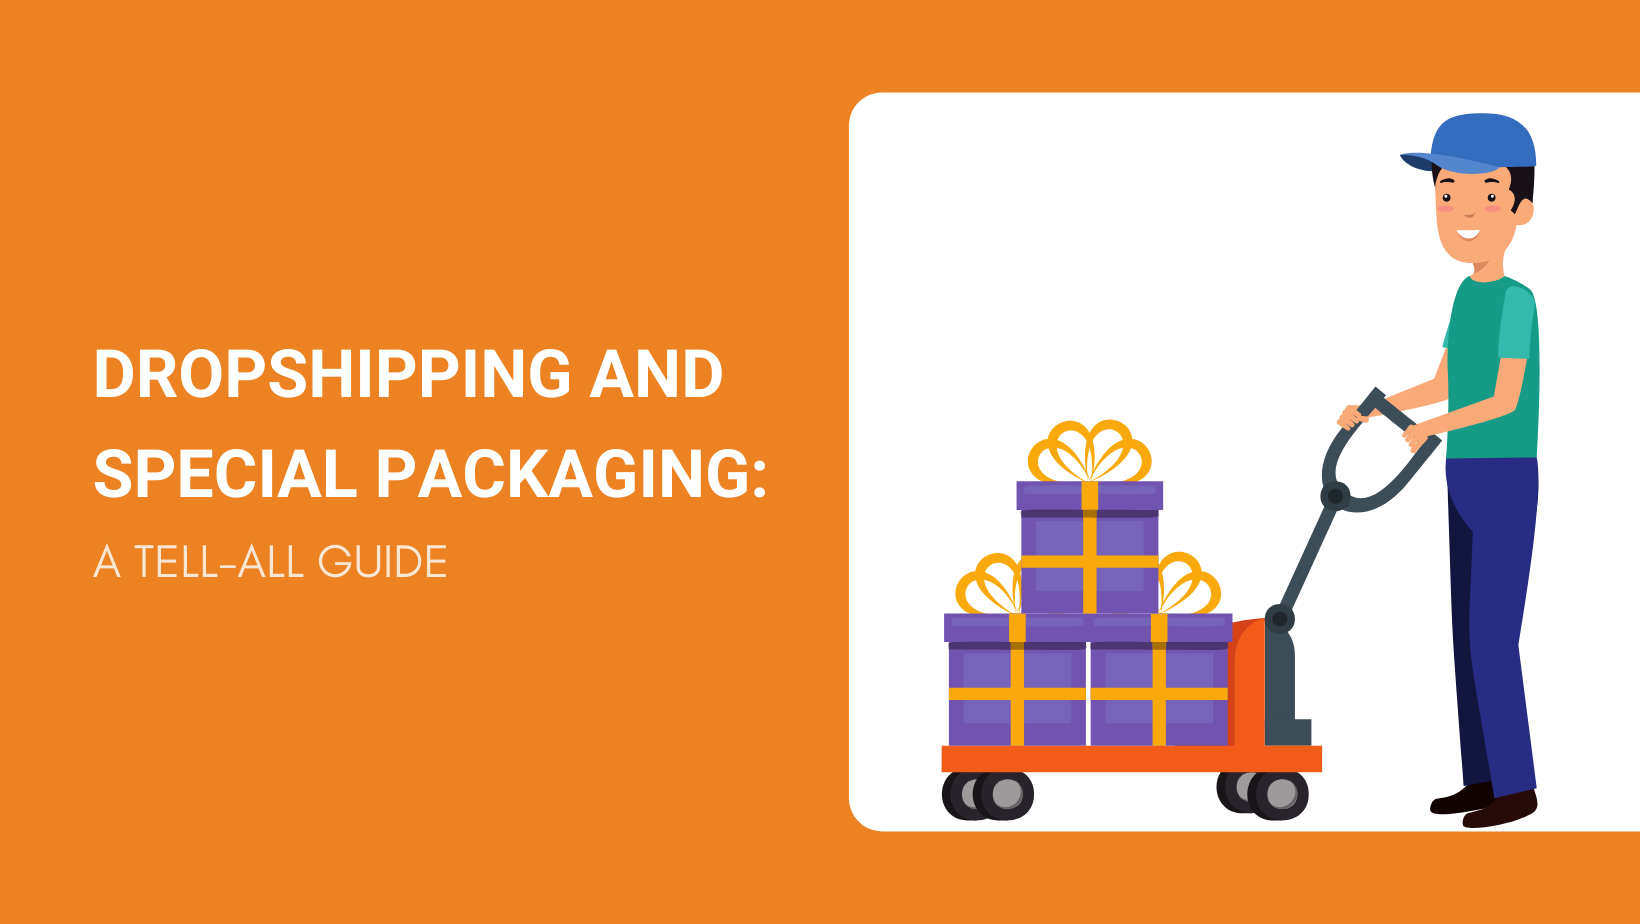 DROPSHIPPING AND SPECIAL PACKAGING A TELL-ALL GUIDE